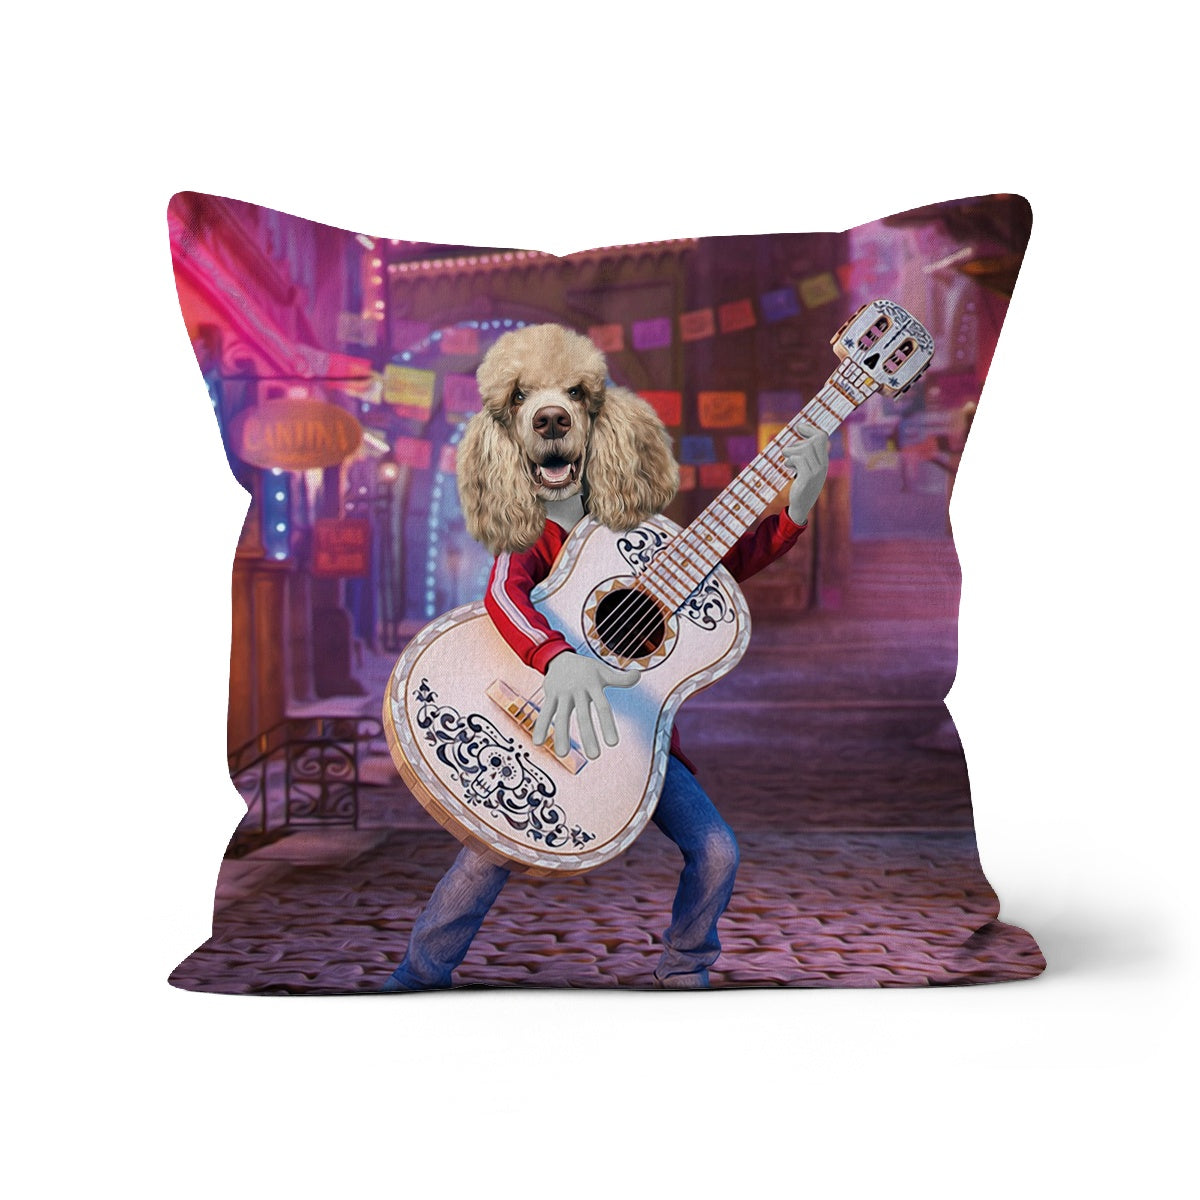 The Miguel (Coco Inspired), Paw & Glory, pawandglory, dog personalized pillow, customized throw pillows, custom pet pillows, the pet pillow, pet pillow photo, portrait pillow, Pet Portrait cushion,